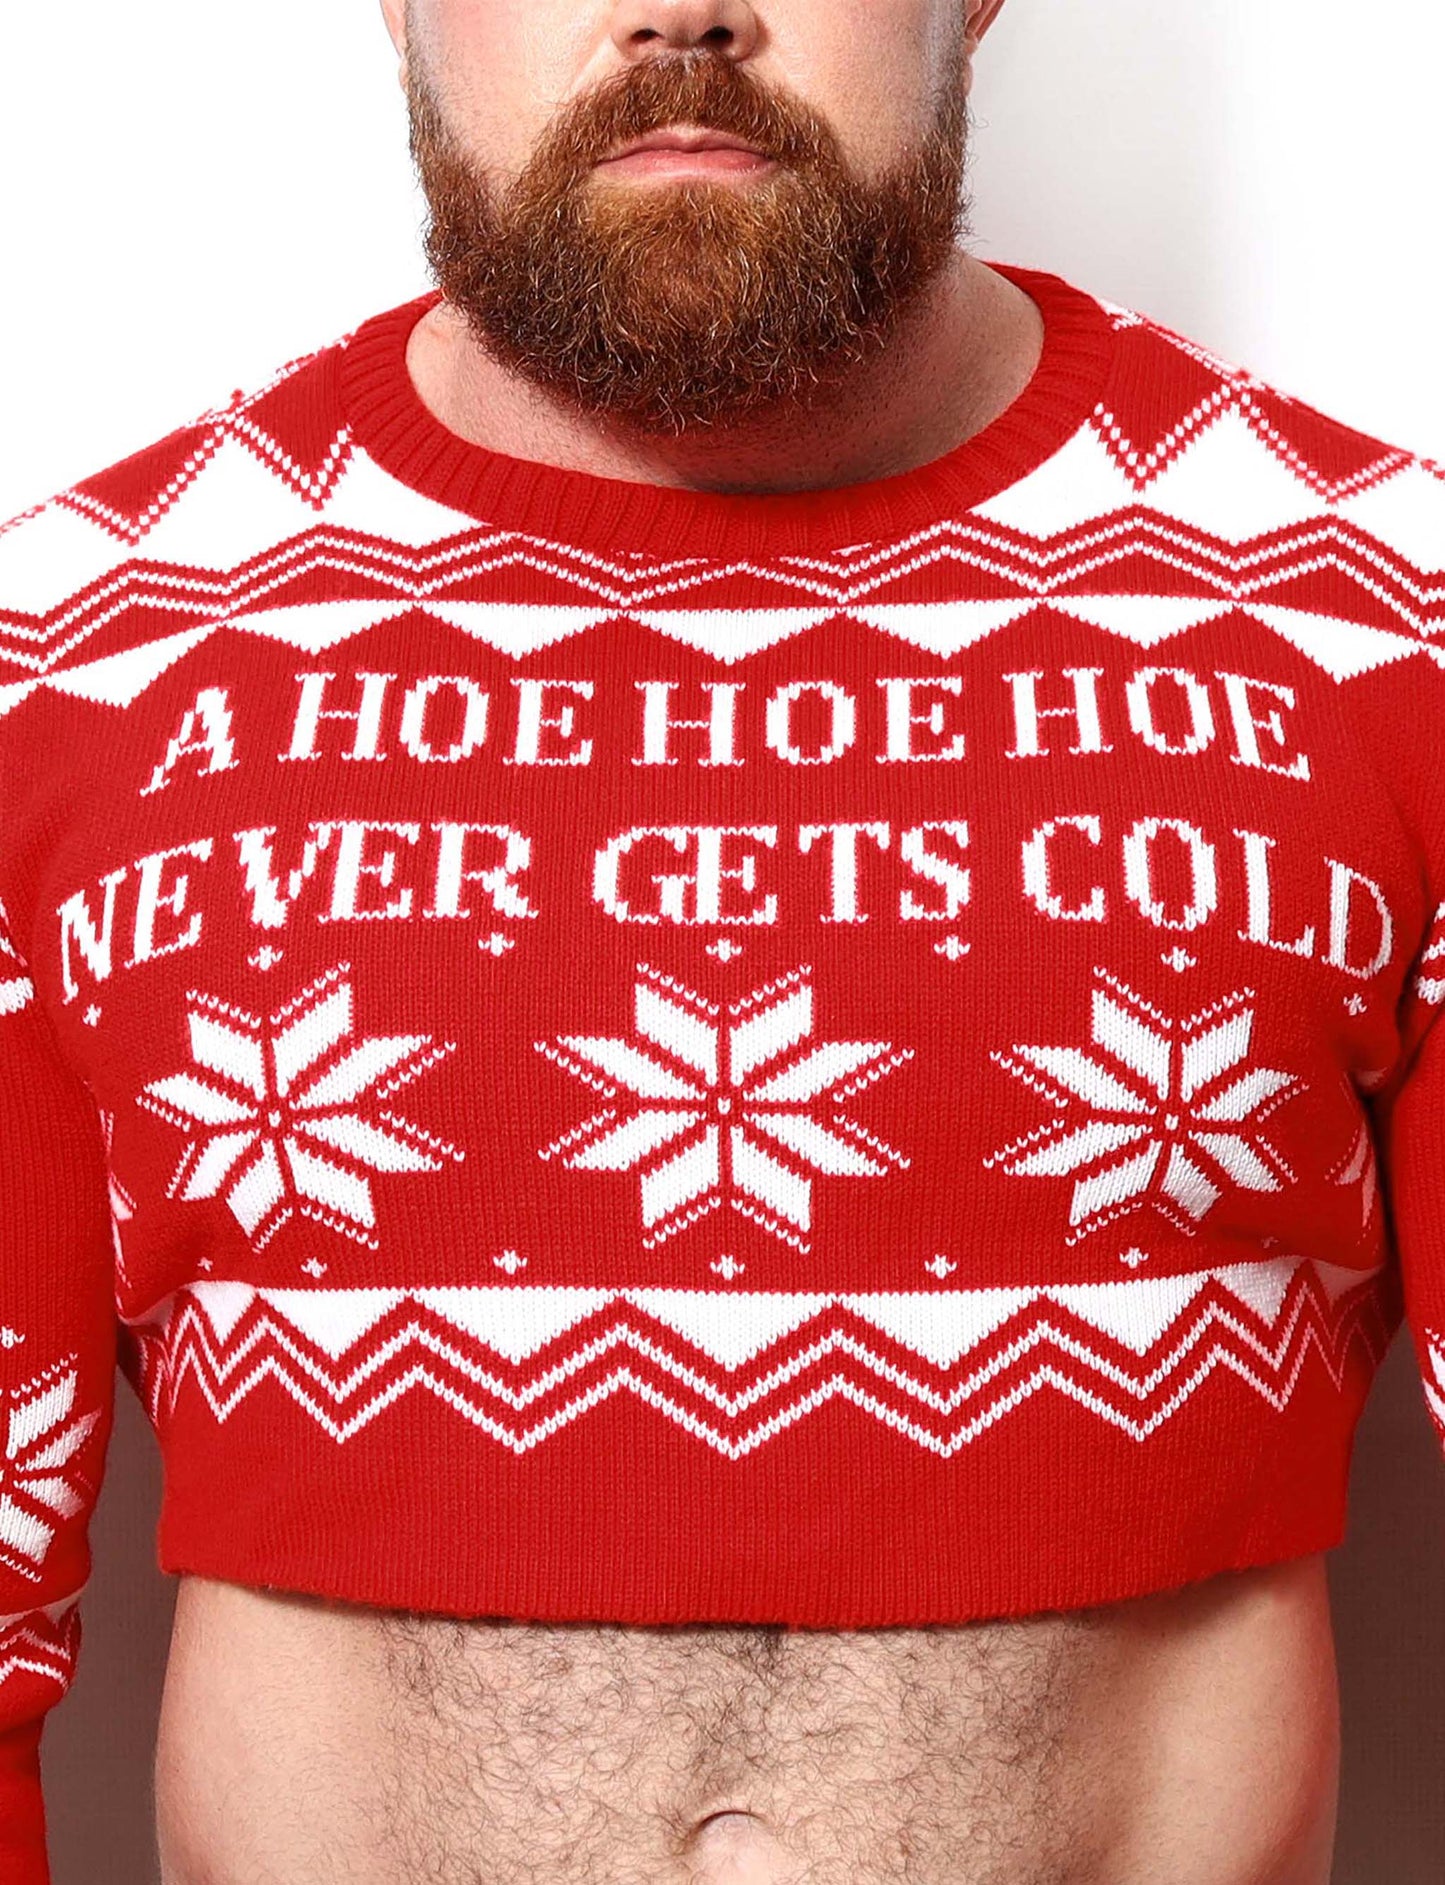 'A hoe hoe hoe never gets cold' Christmas Crop Top